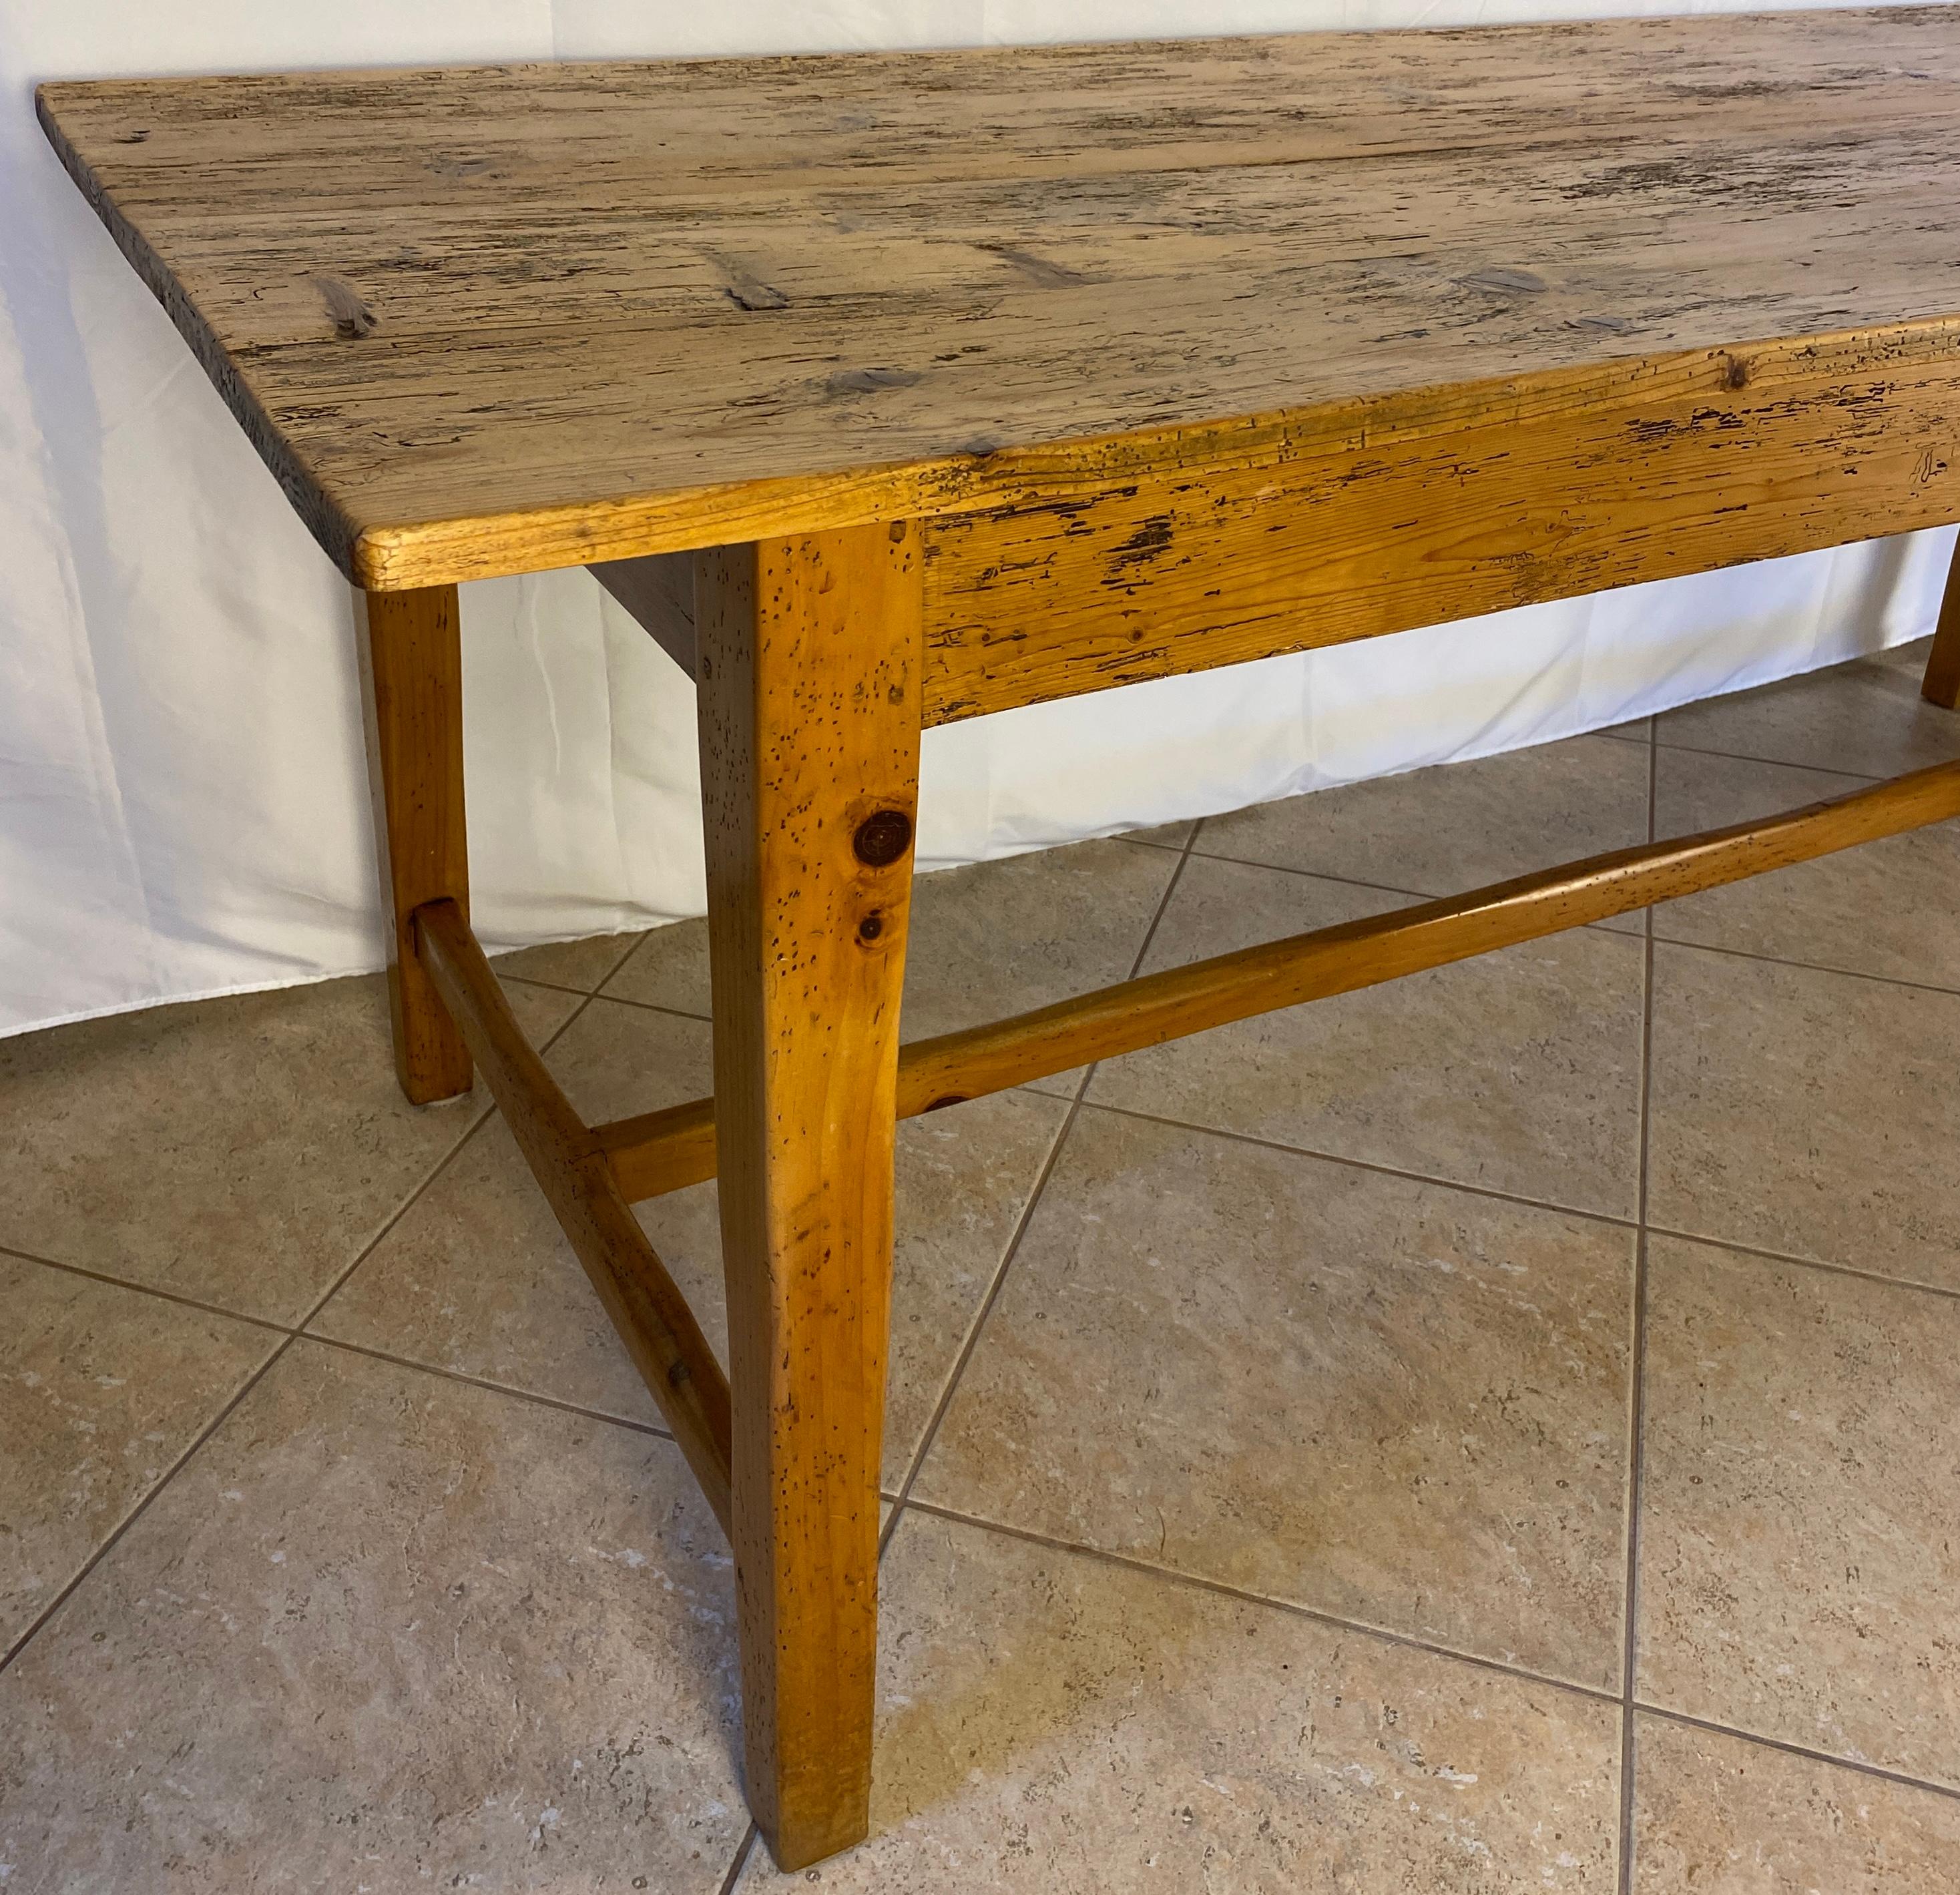 A charming French Provincial style farm table with H stretcher.

This beautiful 20th century French farmhouse table of generous proportions boasts excellent golden colour. Its planks and purely solid pine construction makes this a great find. The